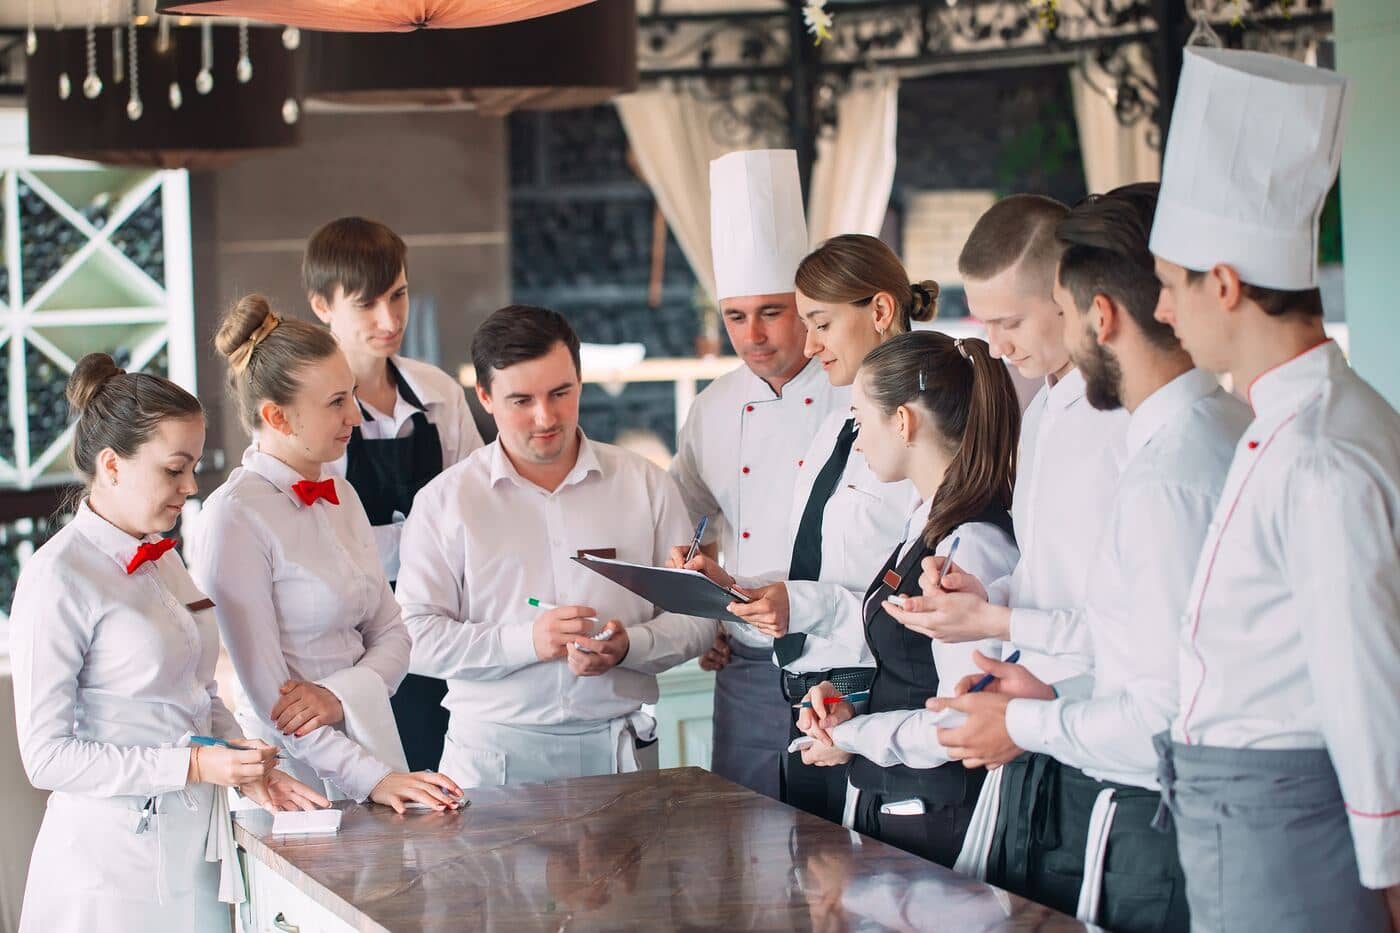 How Restaurants Can Prepare For a Health And Safety Inspection